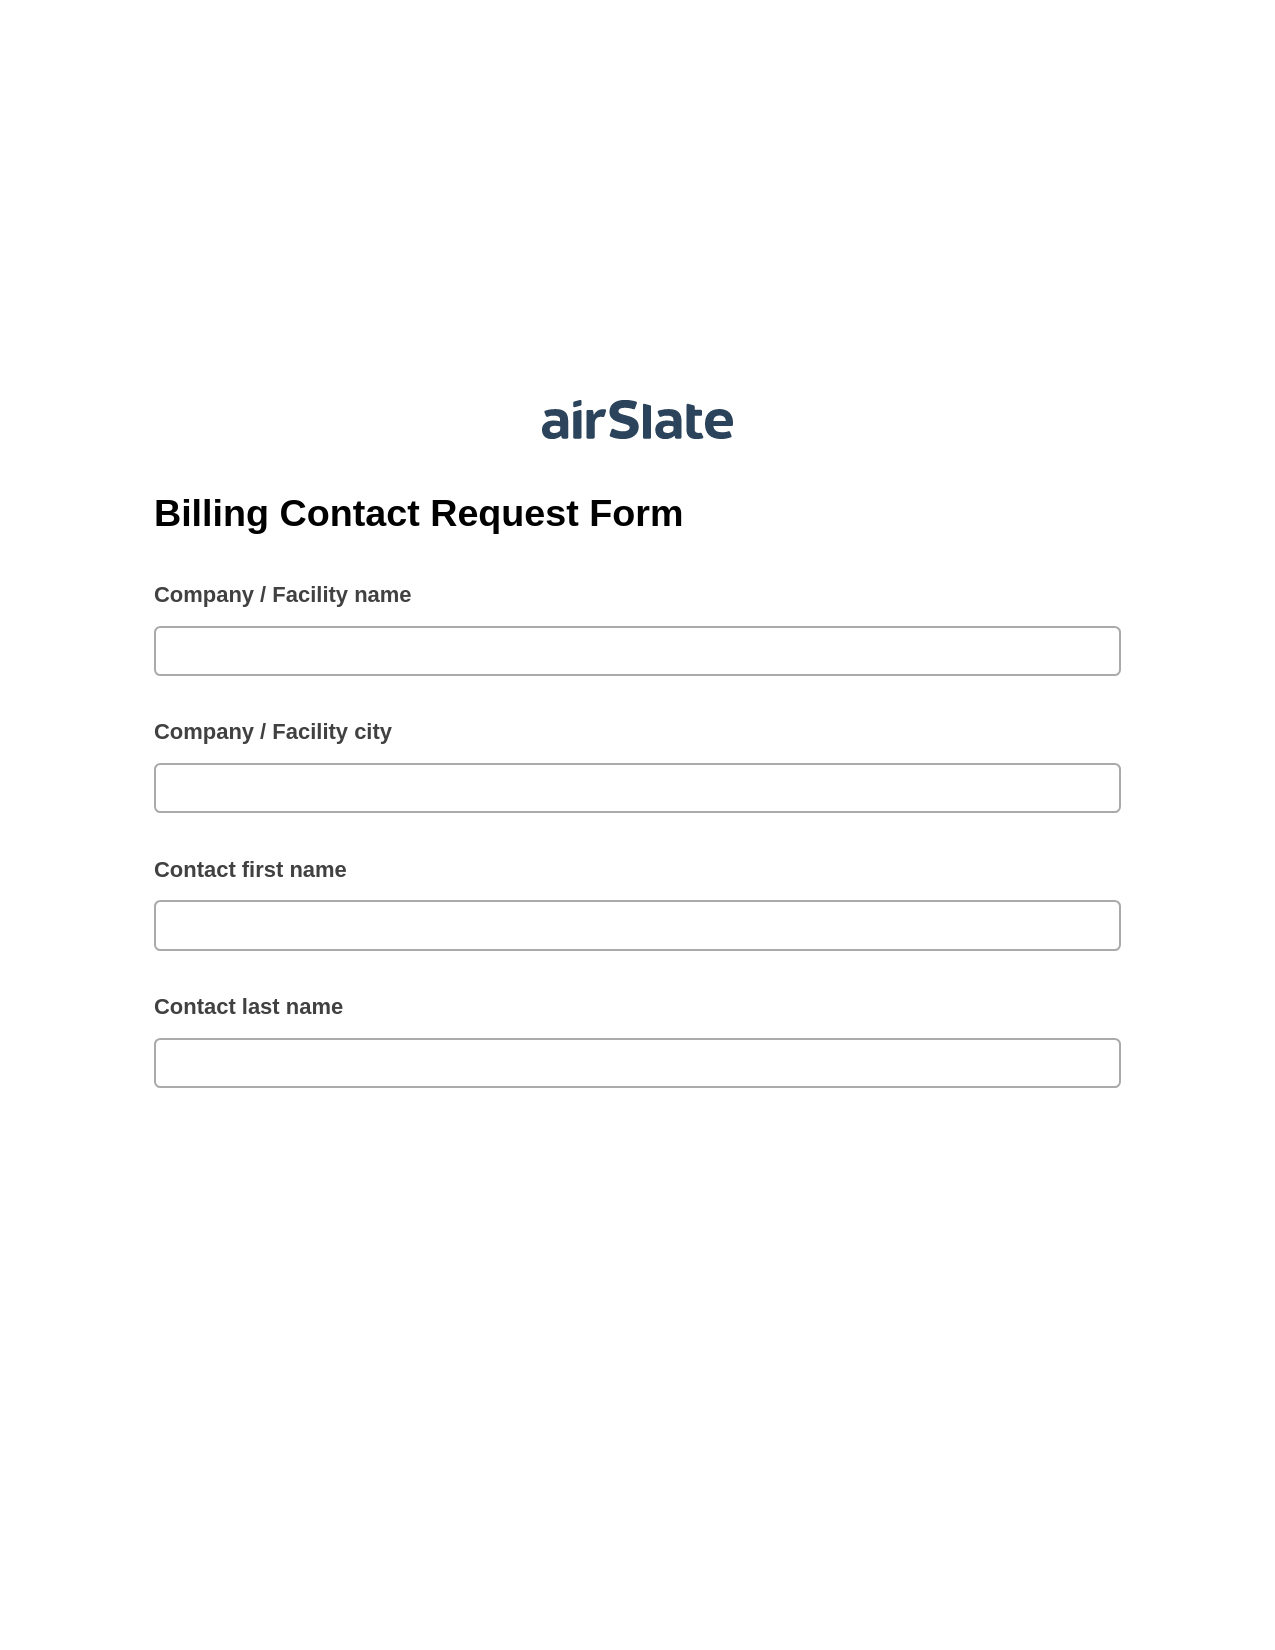 Multirole Billing Contact Request Form Pre-fill from MySQL Bot, Lock the slate bot, Export to MySQL Bot